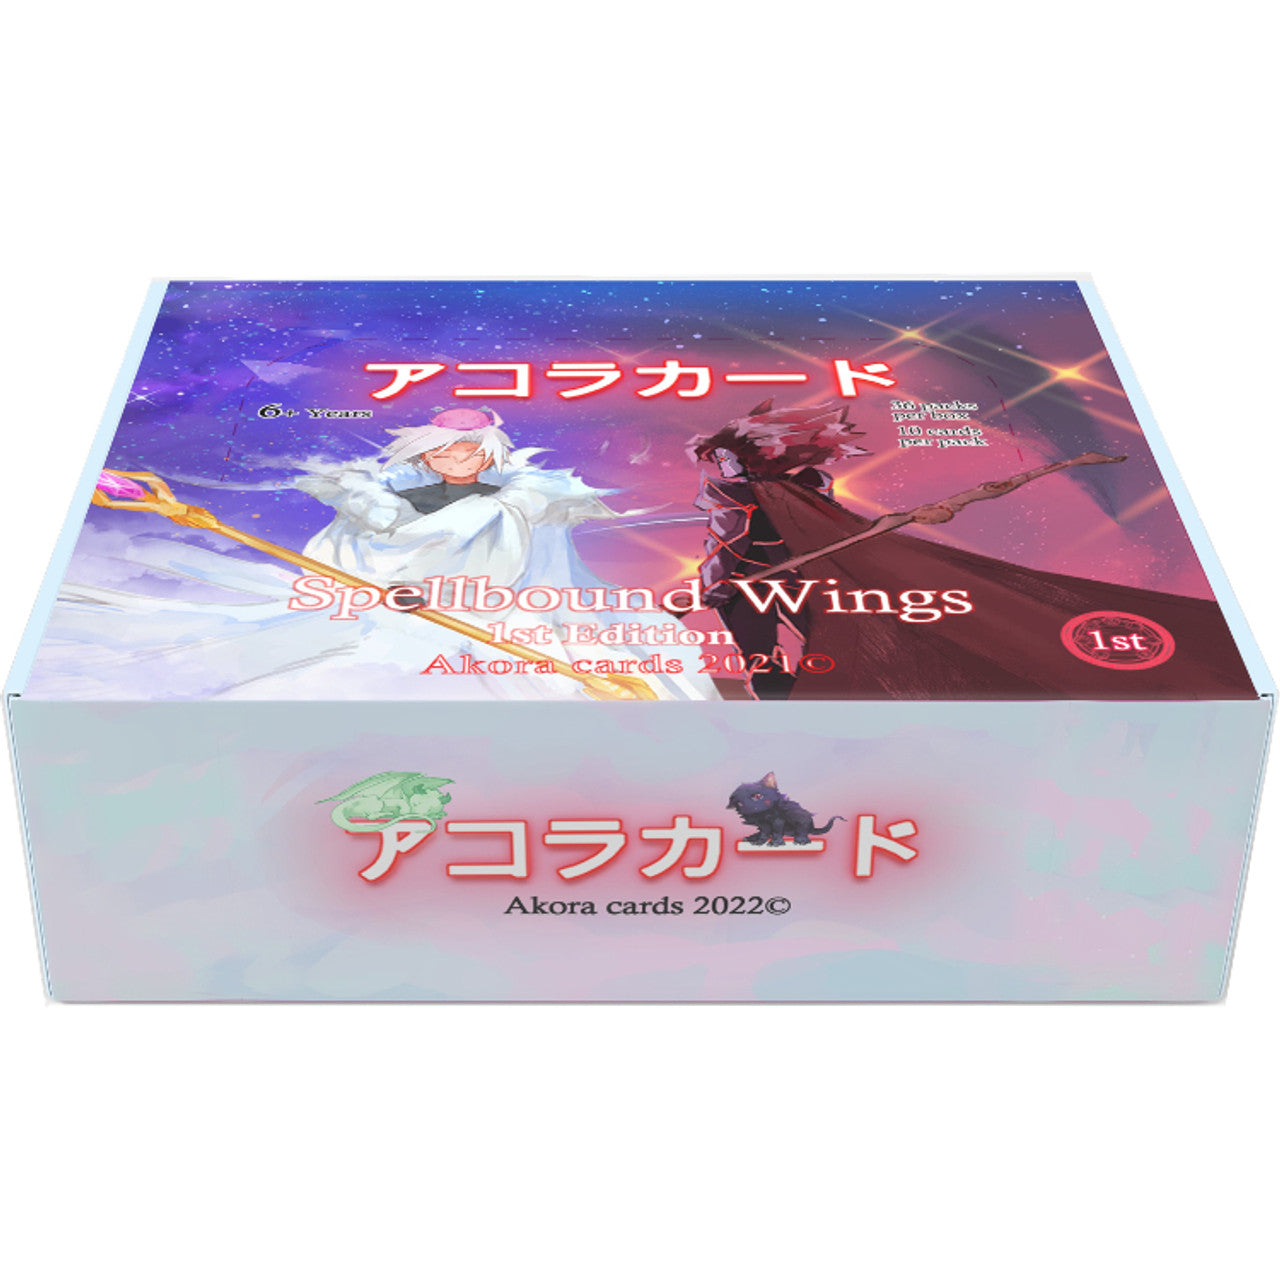 Akora TCG Booster Box - Spellbound Wings (1st Edition)